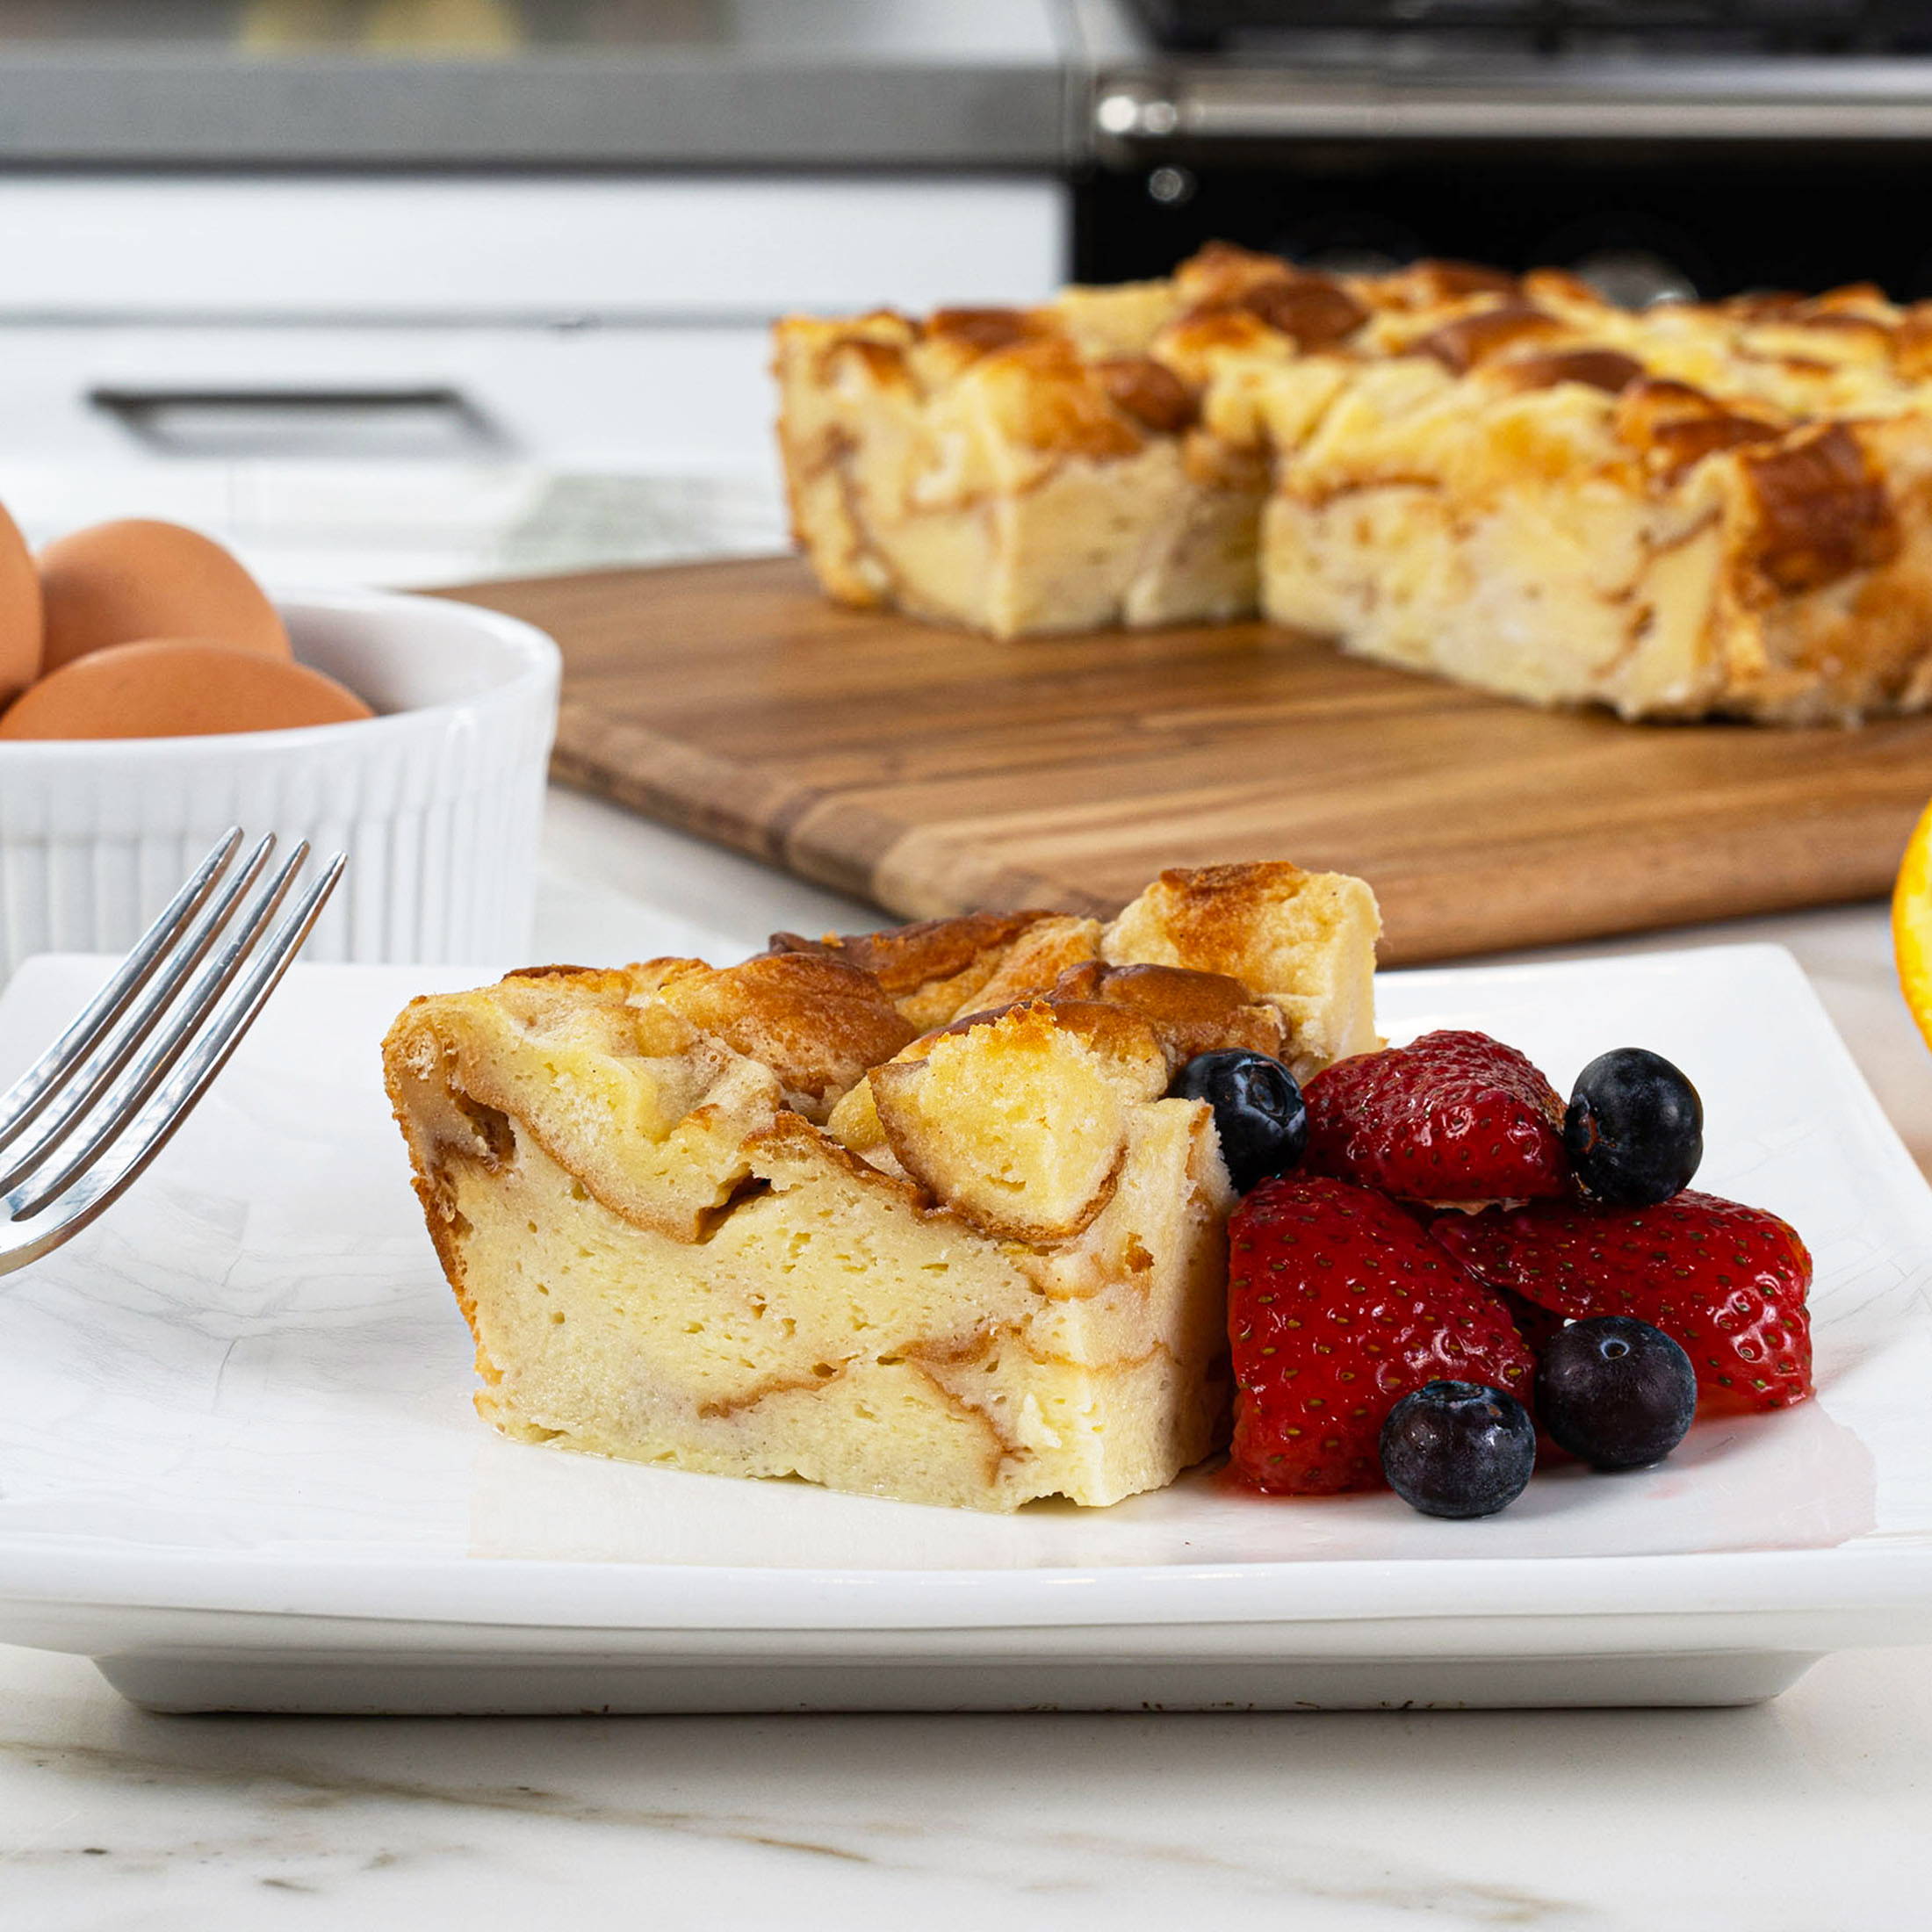 CREAMY COCONUT BREAD PUDDING with MIXED BERRIES